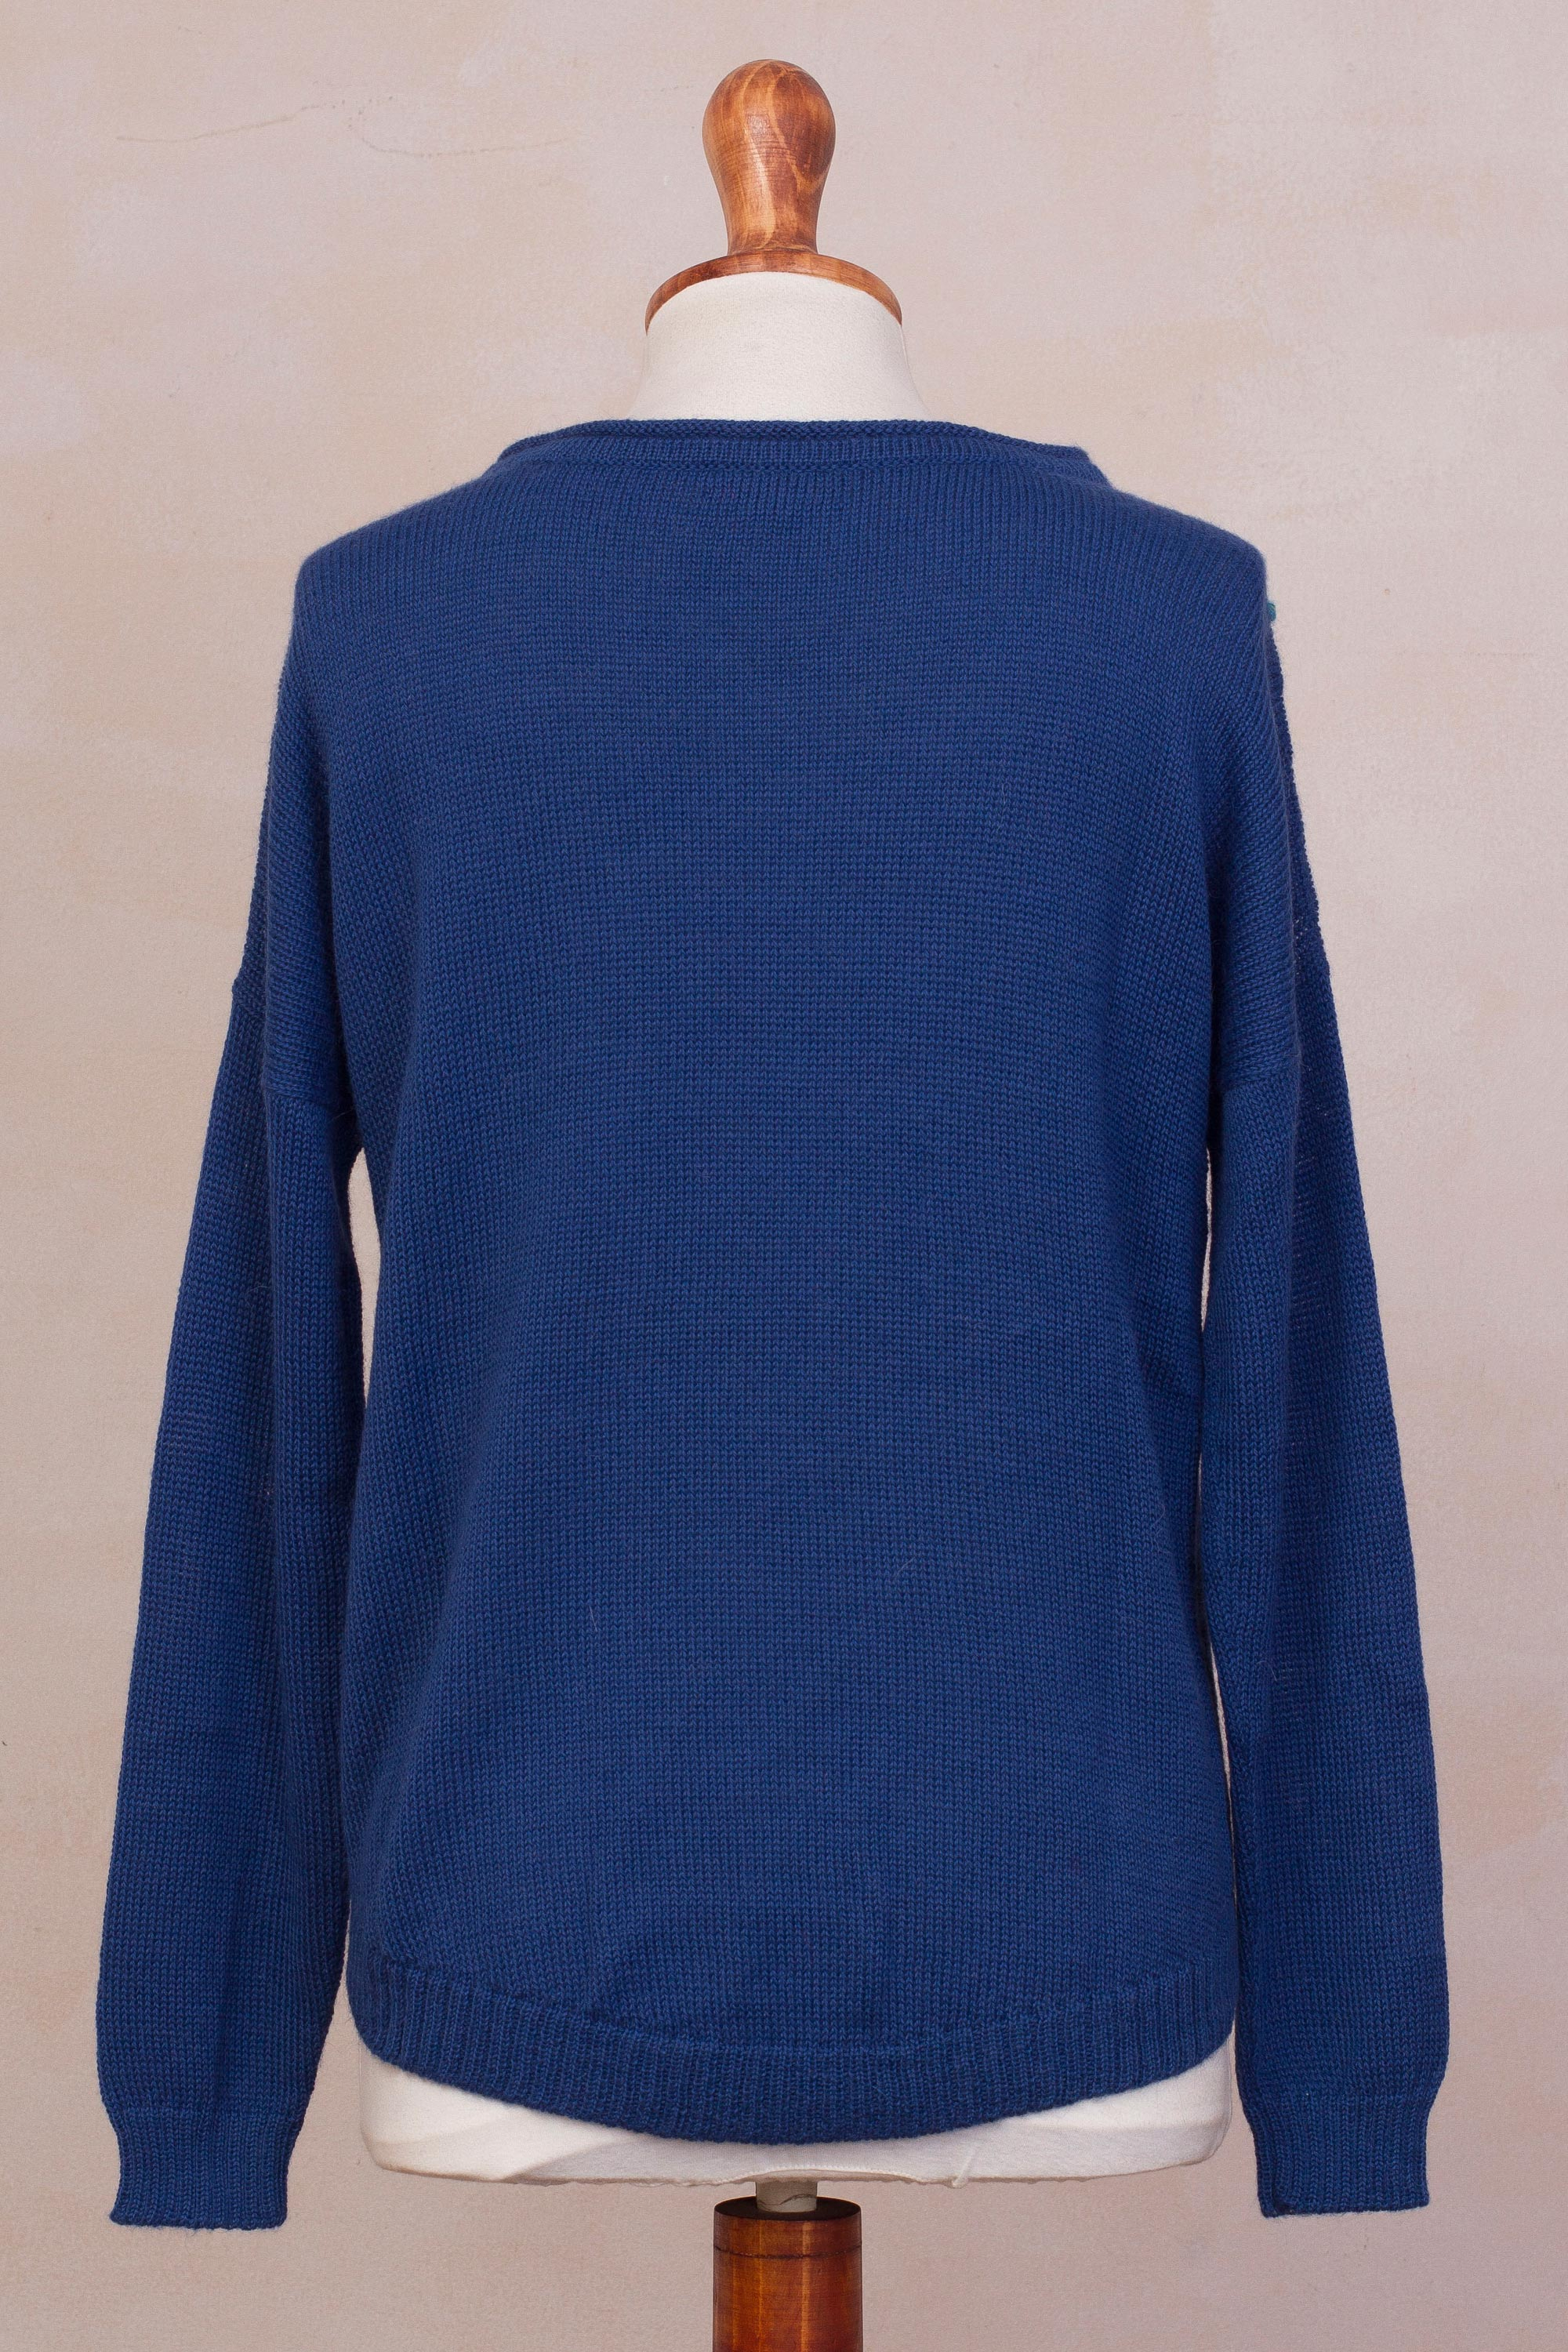 UNICEF Market | Knit Blue Baby Alpaca Pullover Sweater from Peru ...